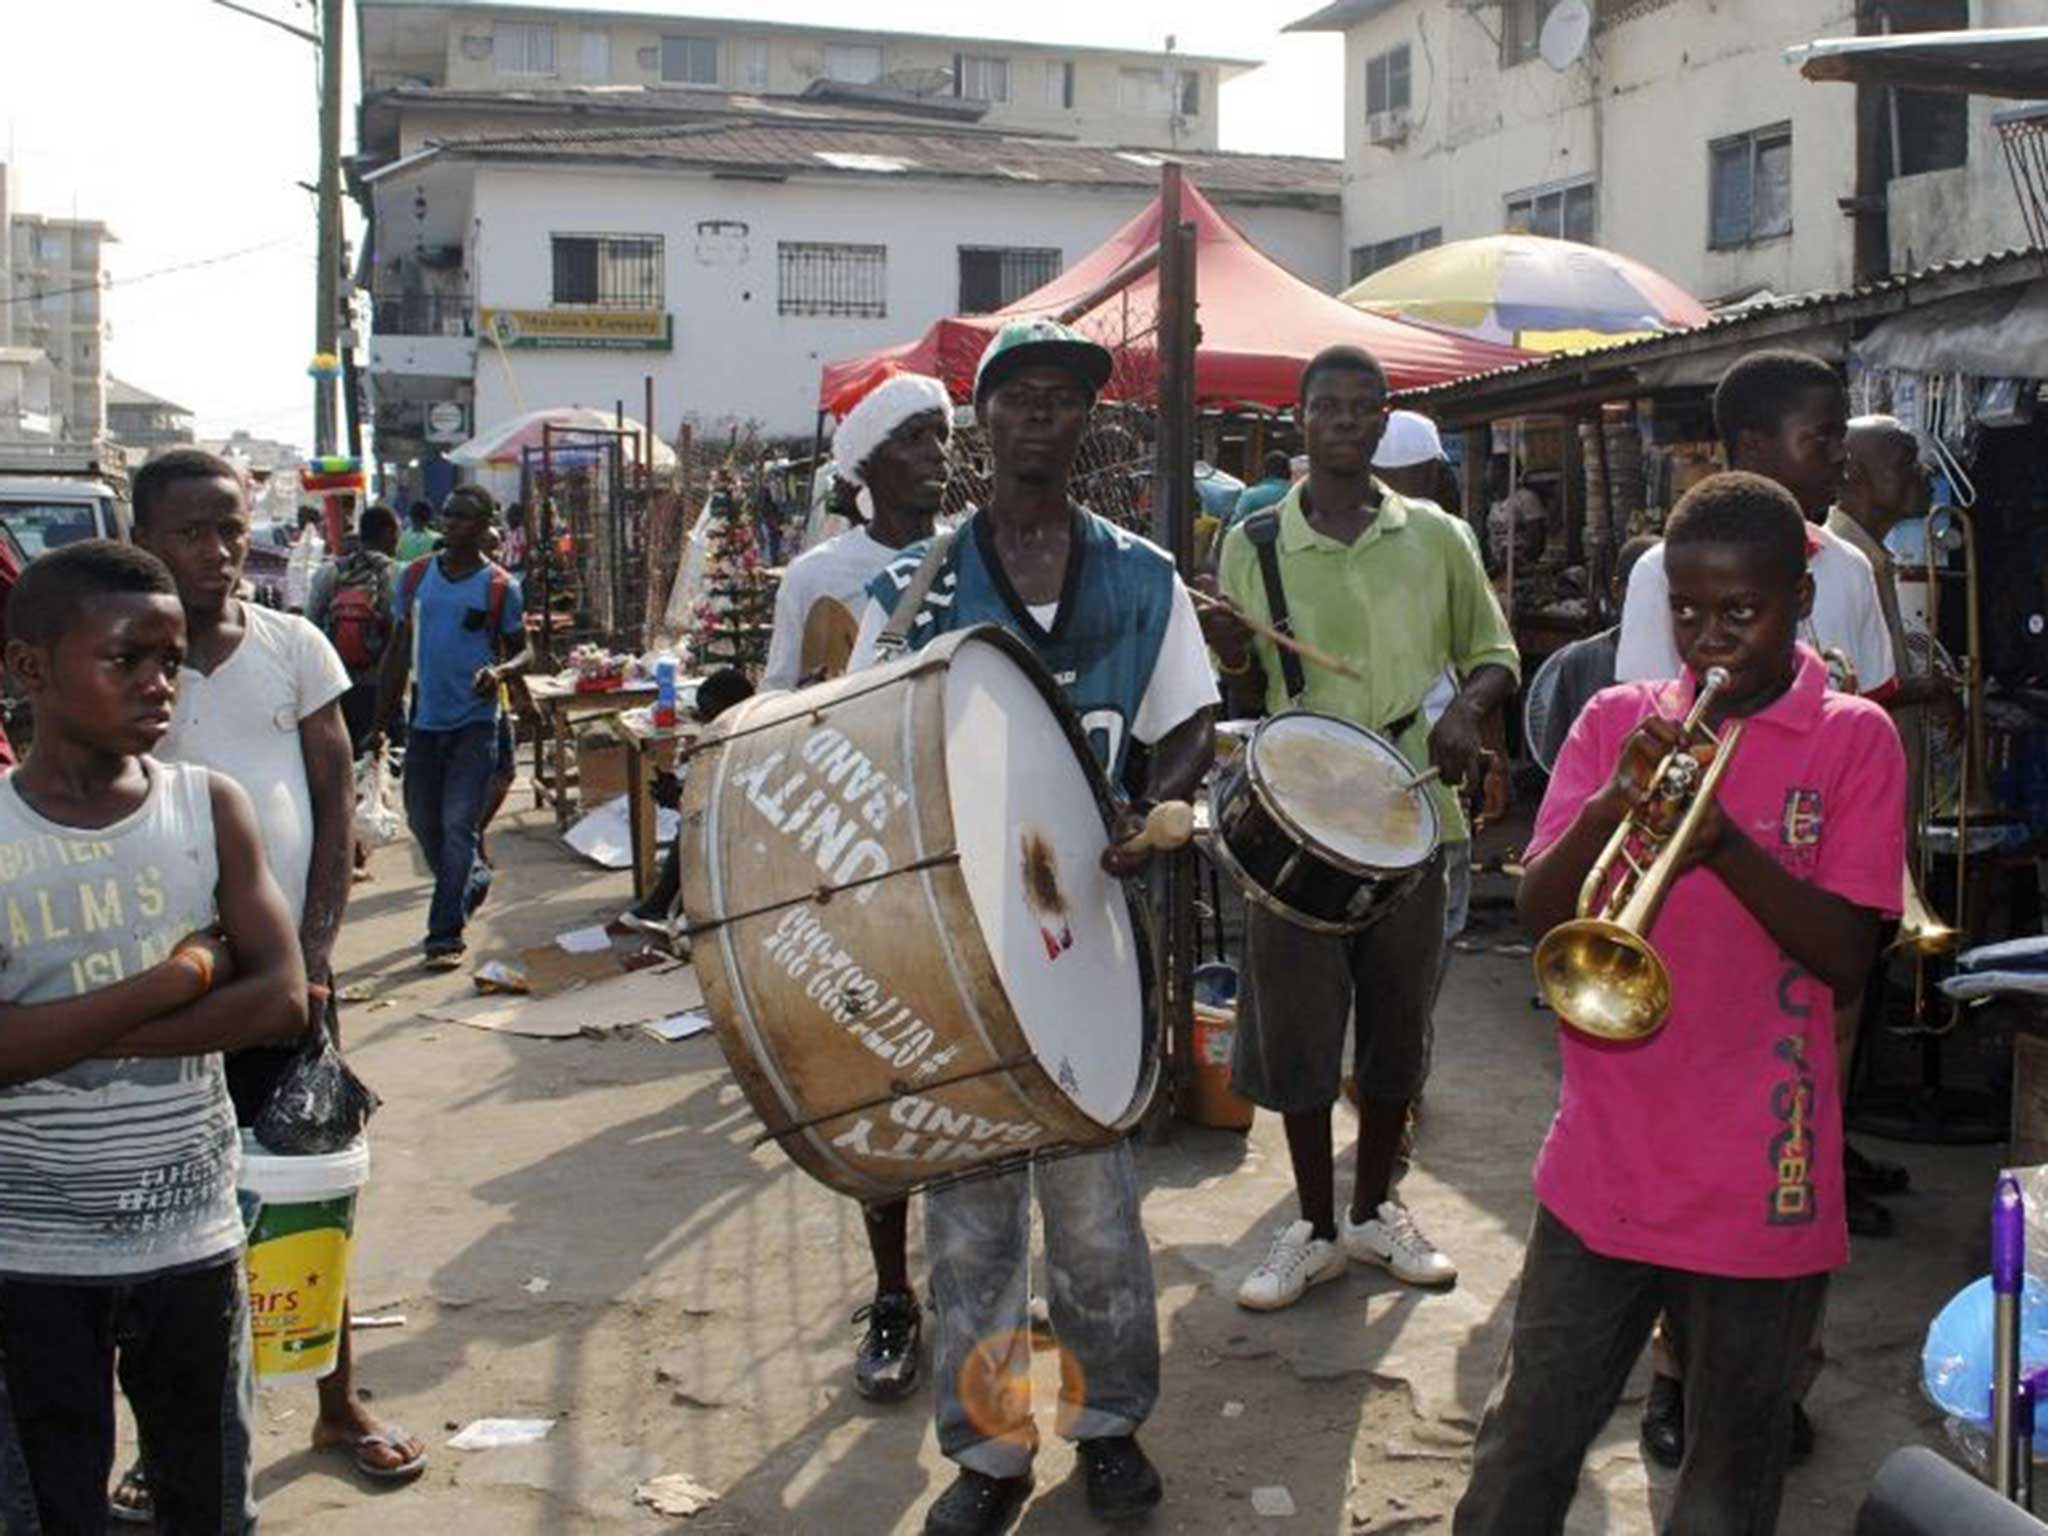 A marching band performs on the street in Monrovia as the city attempted to celebrate the festive period with some degree of normality